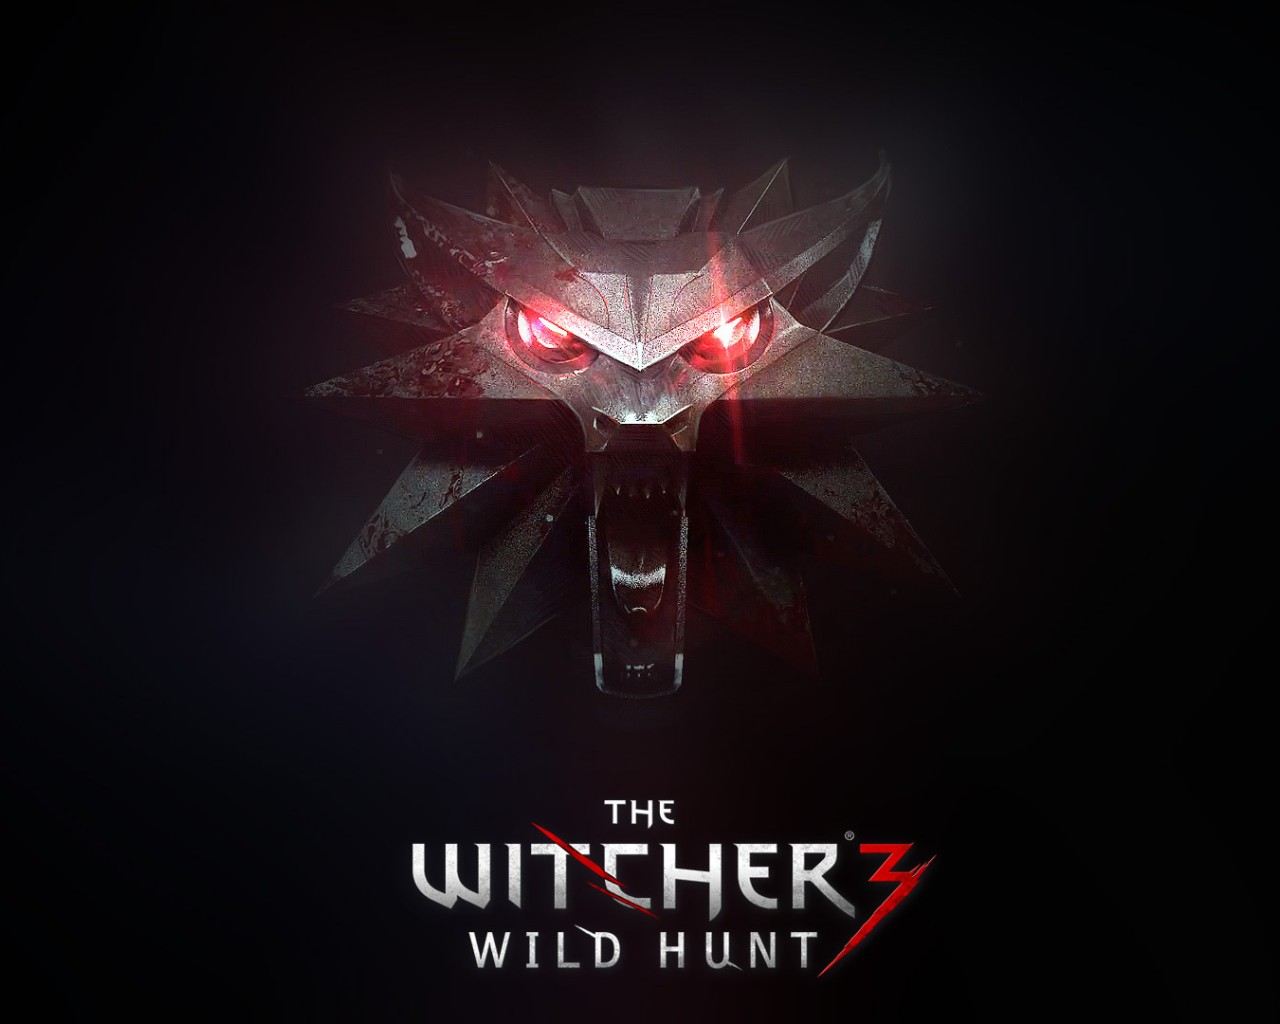 The witcher 3 full soundtrack фото 109